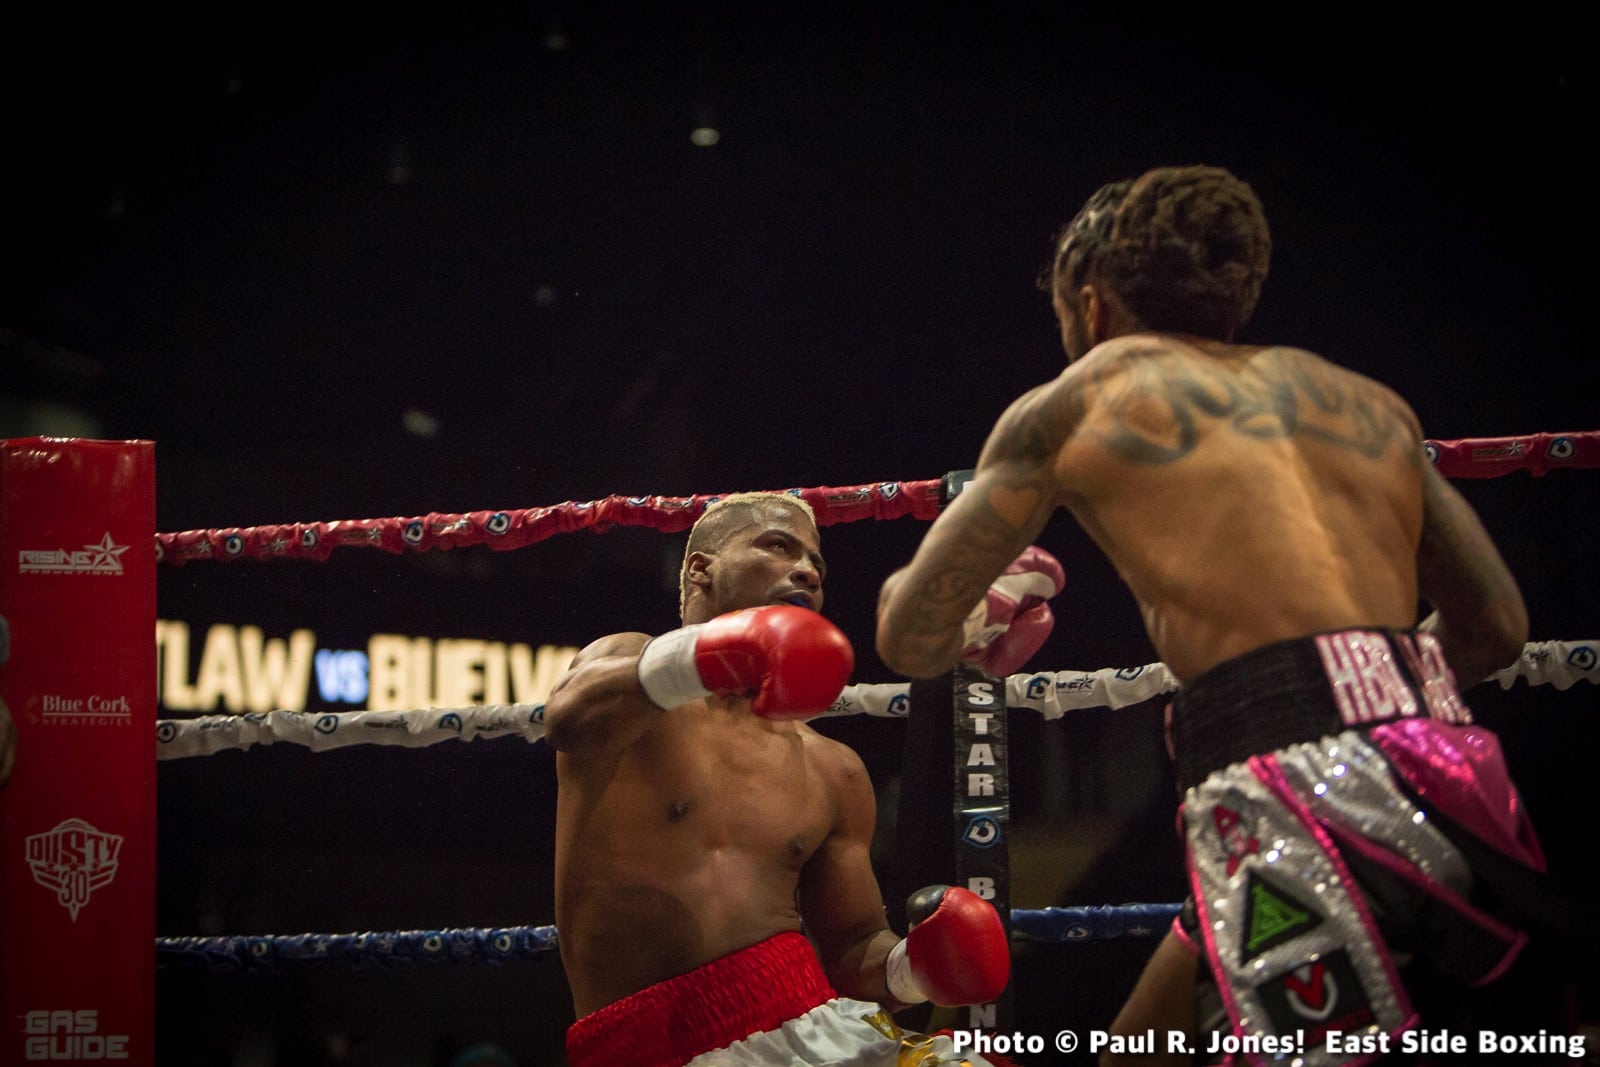 WEEKEND RECAP: With Hernández-Harrison a late scratch, Outlaw fills in and scores impressive KO win over Buelvas – Prograis, Hooker, Photos, More!